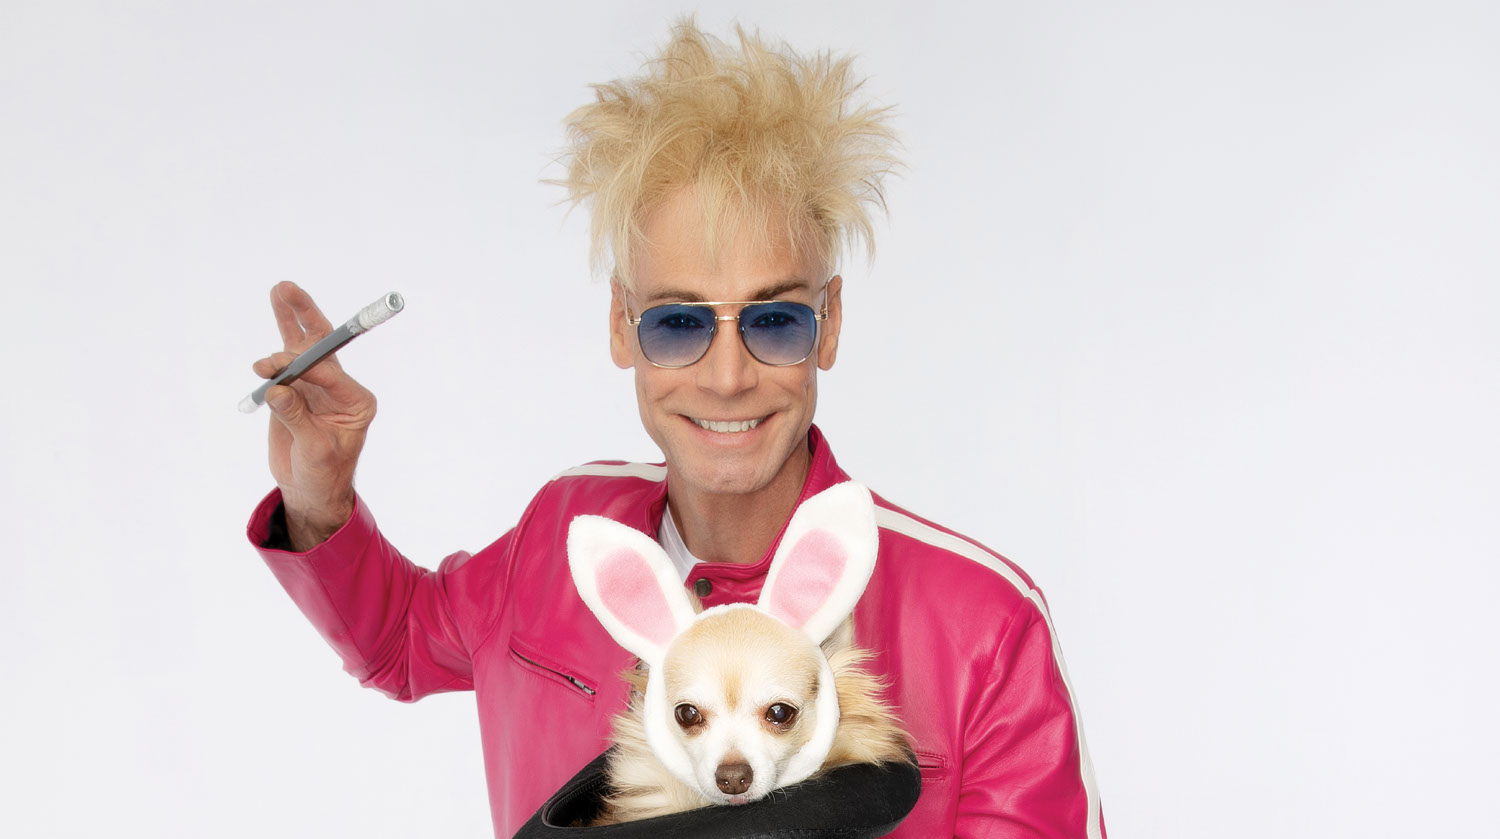 Image of Murray The Magician smiling before a white backdrop. He has light-toned skin and blonde teased hair. Murray has a wand raised in his right hand. He wears aviator sunglasses with blue lenses, and a pink jacket with a white stripe across the shoulders. In his left hand, he holds a black hat. Inside of the black hat, there is a white fluffy dog wearing bunny ears.